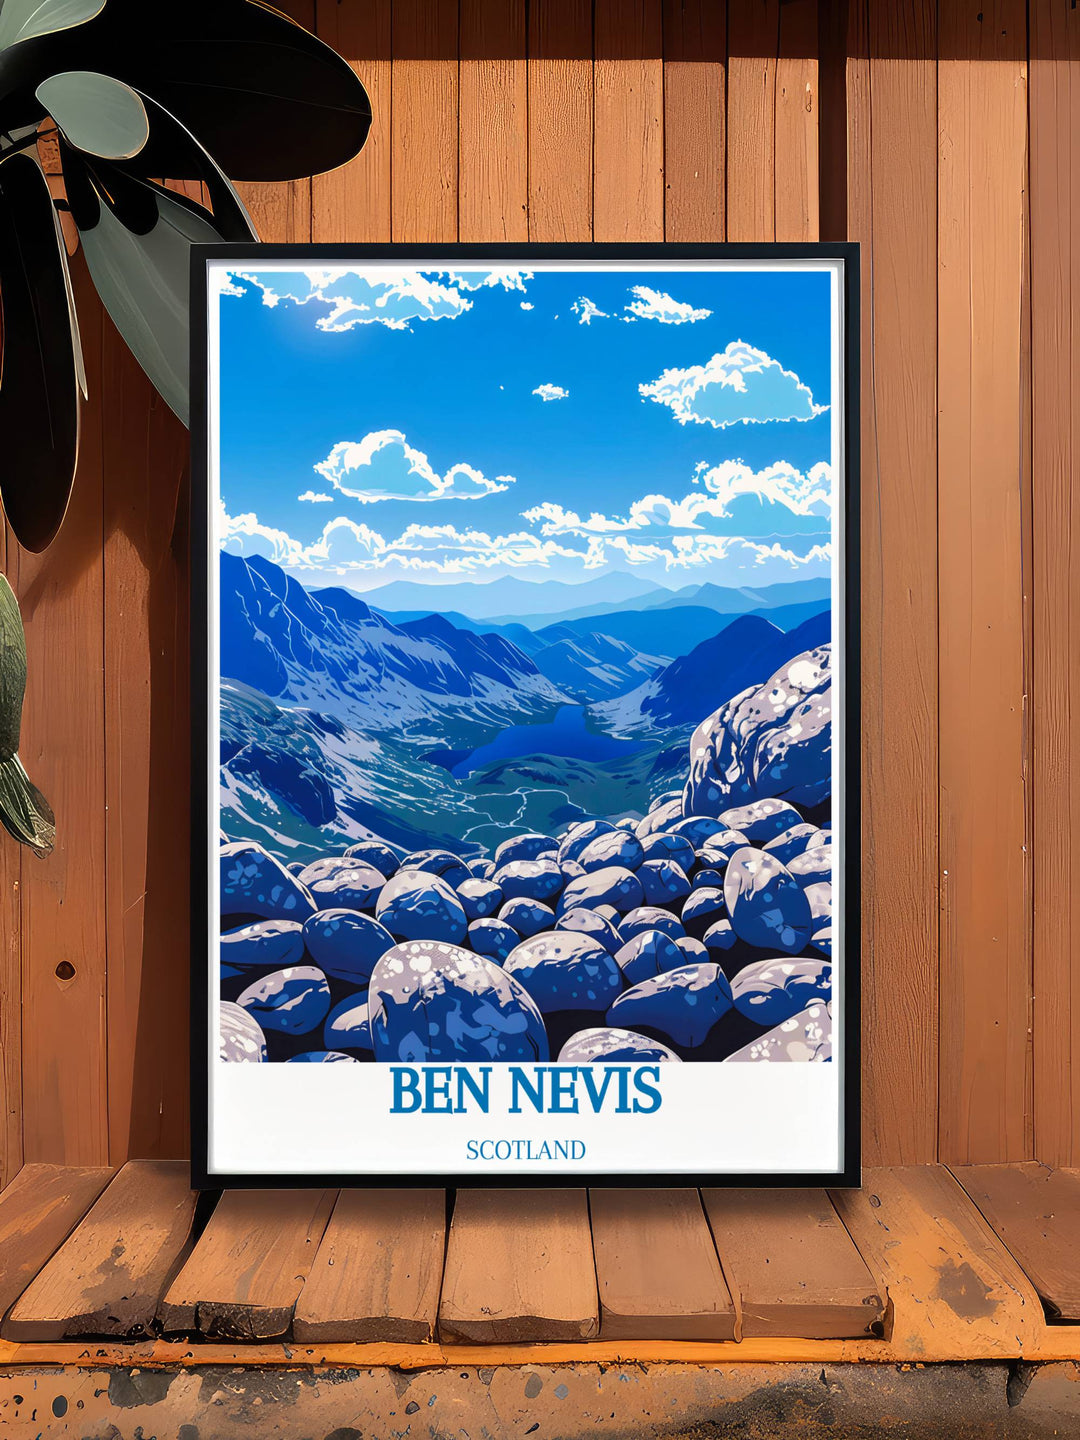 Sunrise over Ben Nevis summit depicted in a travel poster, emphasizing the golden hues illuminating the snow and rocks